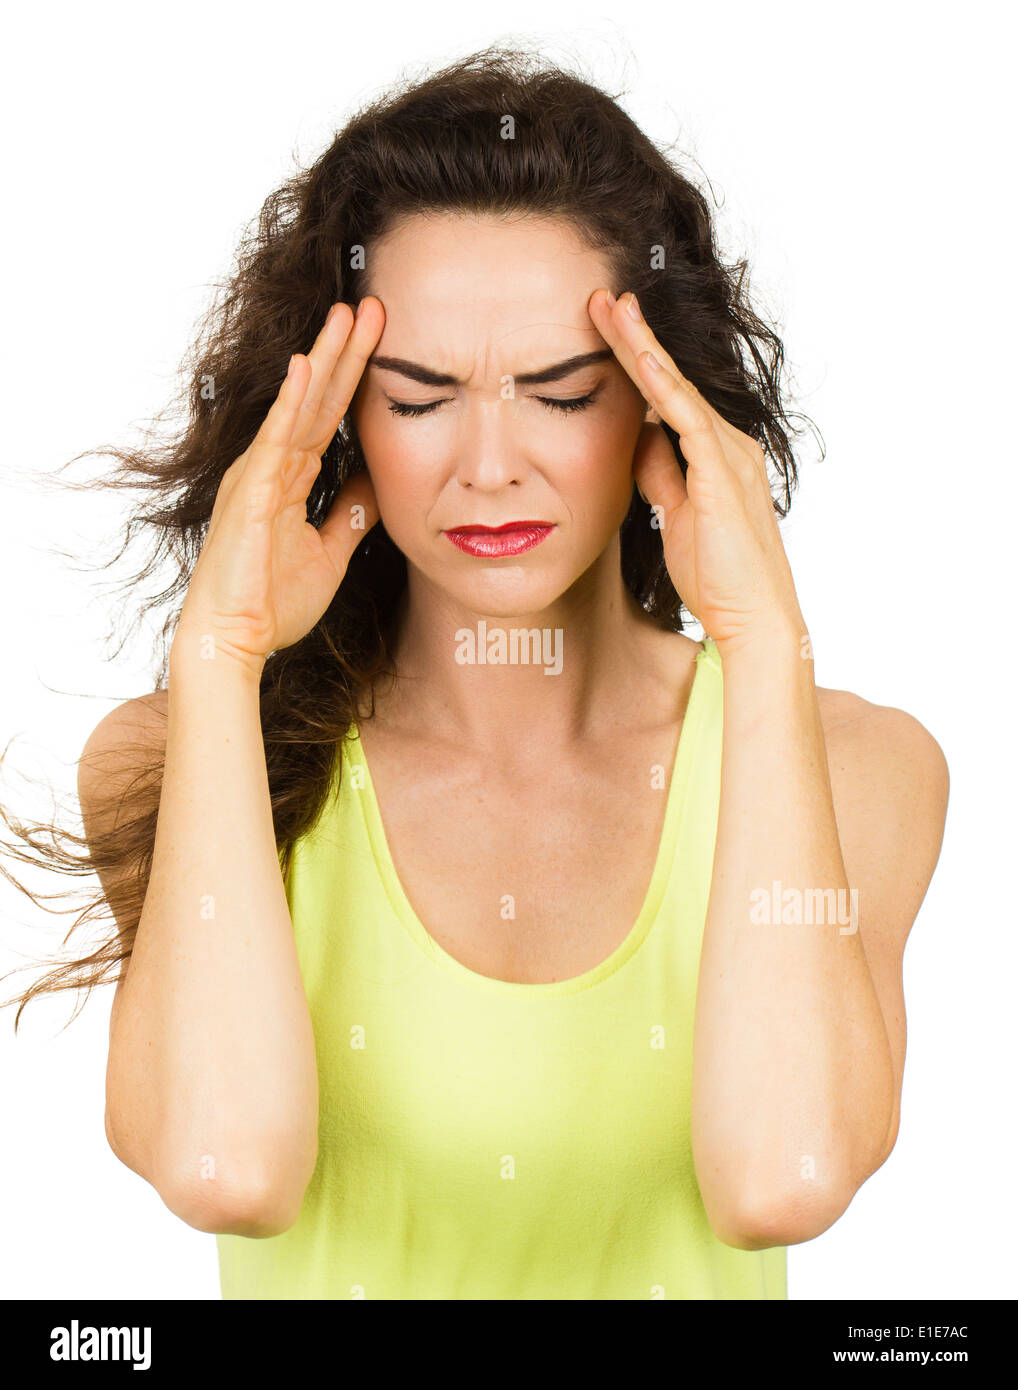 A woman with a bad headache or migraine. Isolated on white. Stock Photo